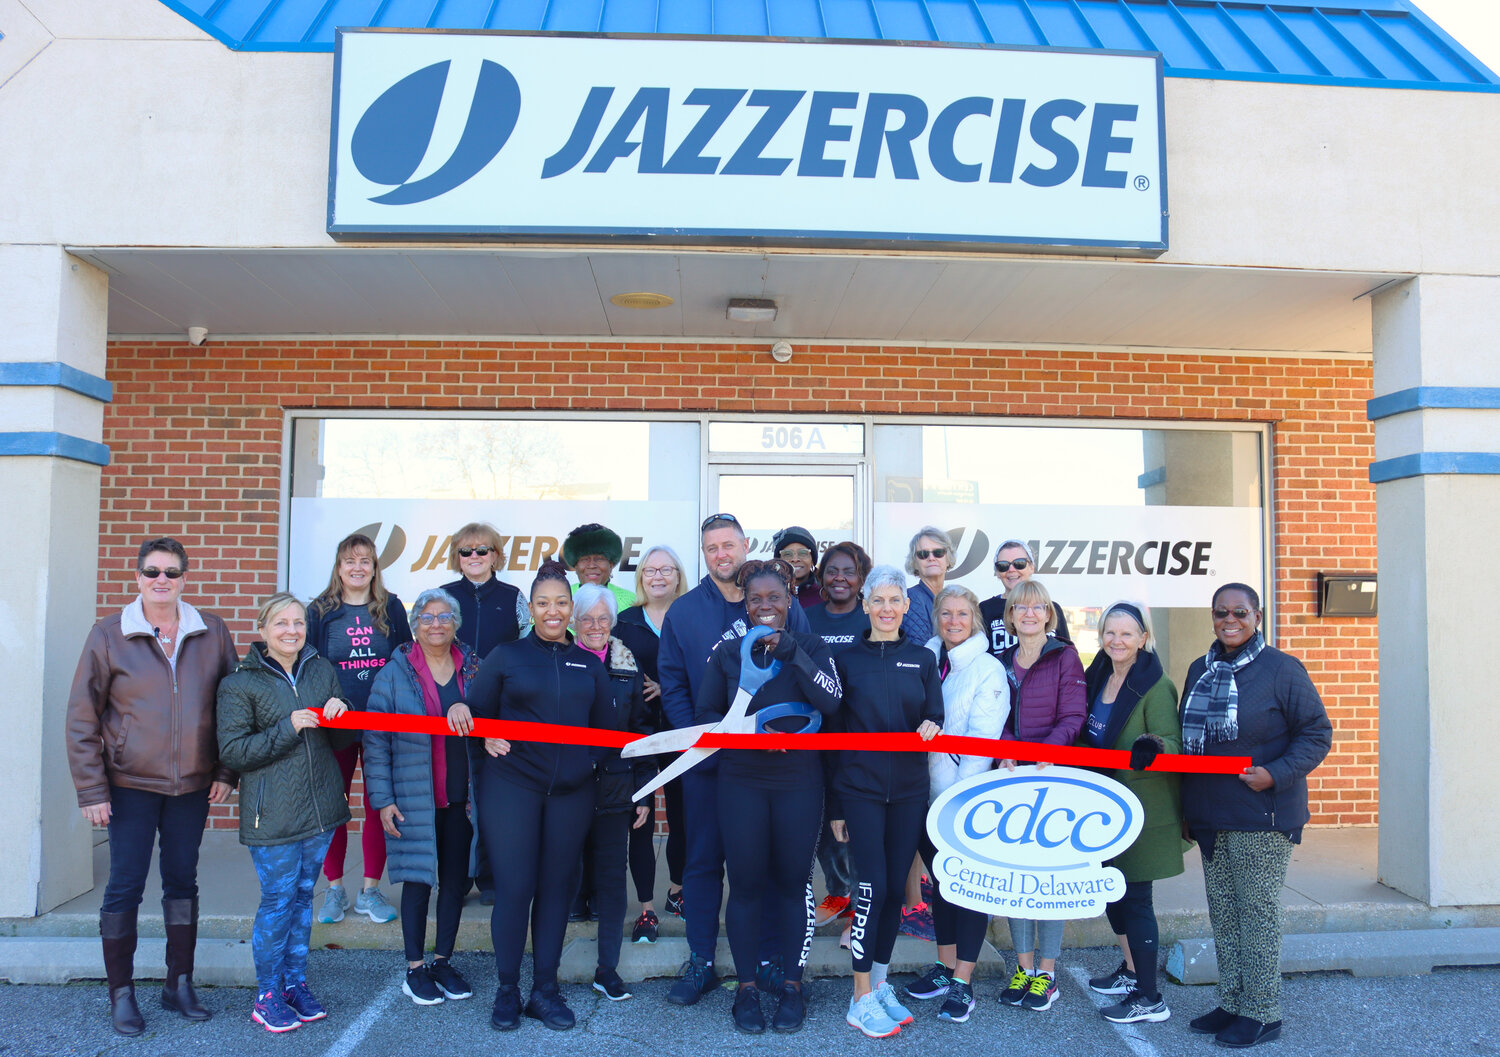 Central Delaware Chamber of Commerce members and friends joined Dover Jazzercise Fitness Center owner and head instructor Glenenise Parks to celebrate the 1-year anniversary in their new location.